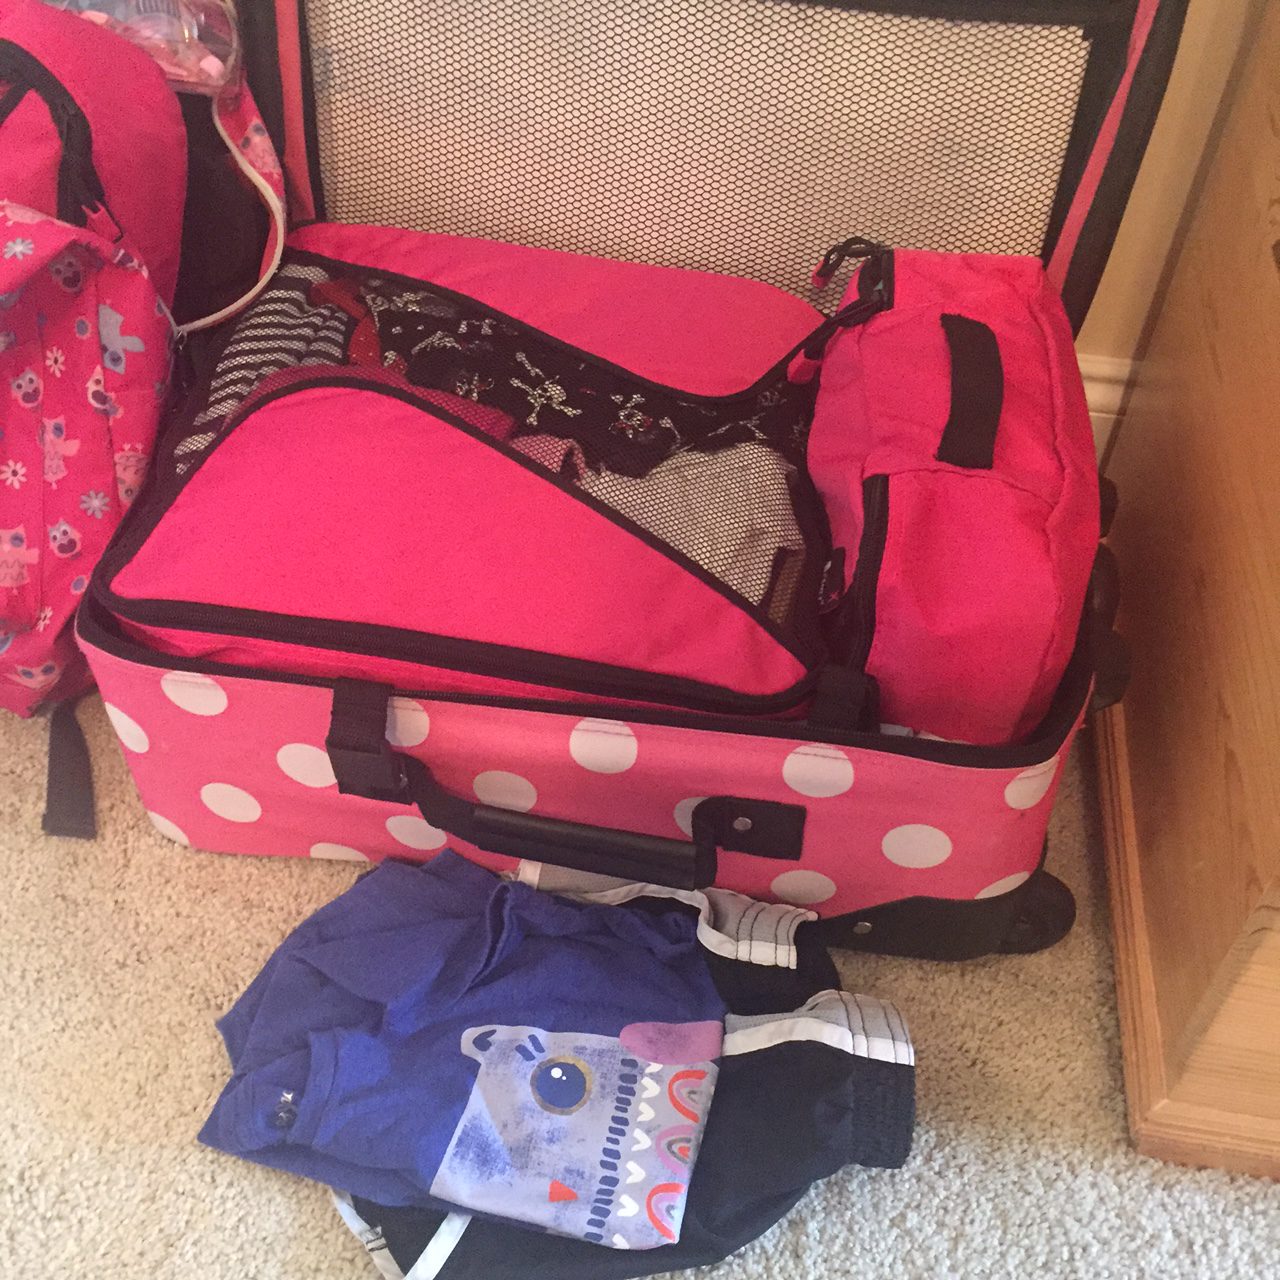 packing for our Disney cruise